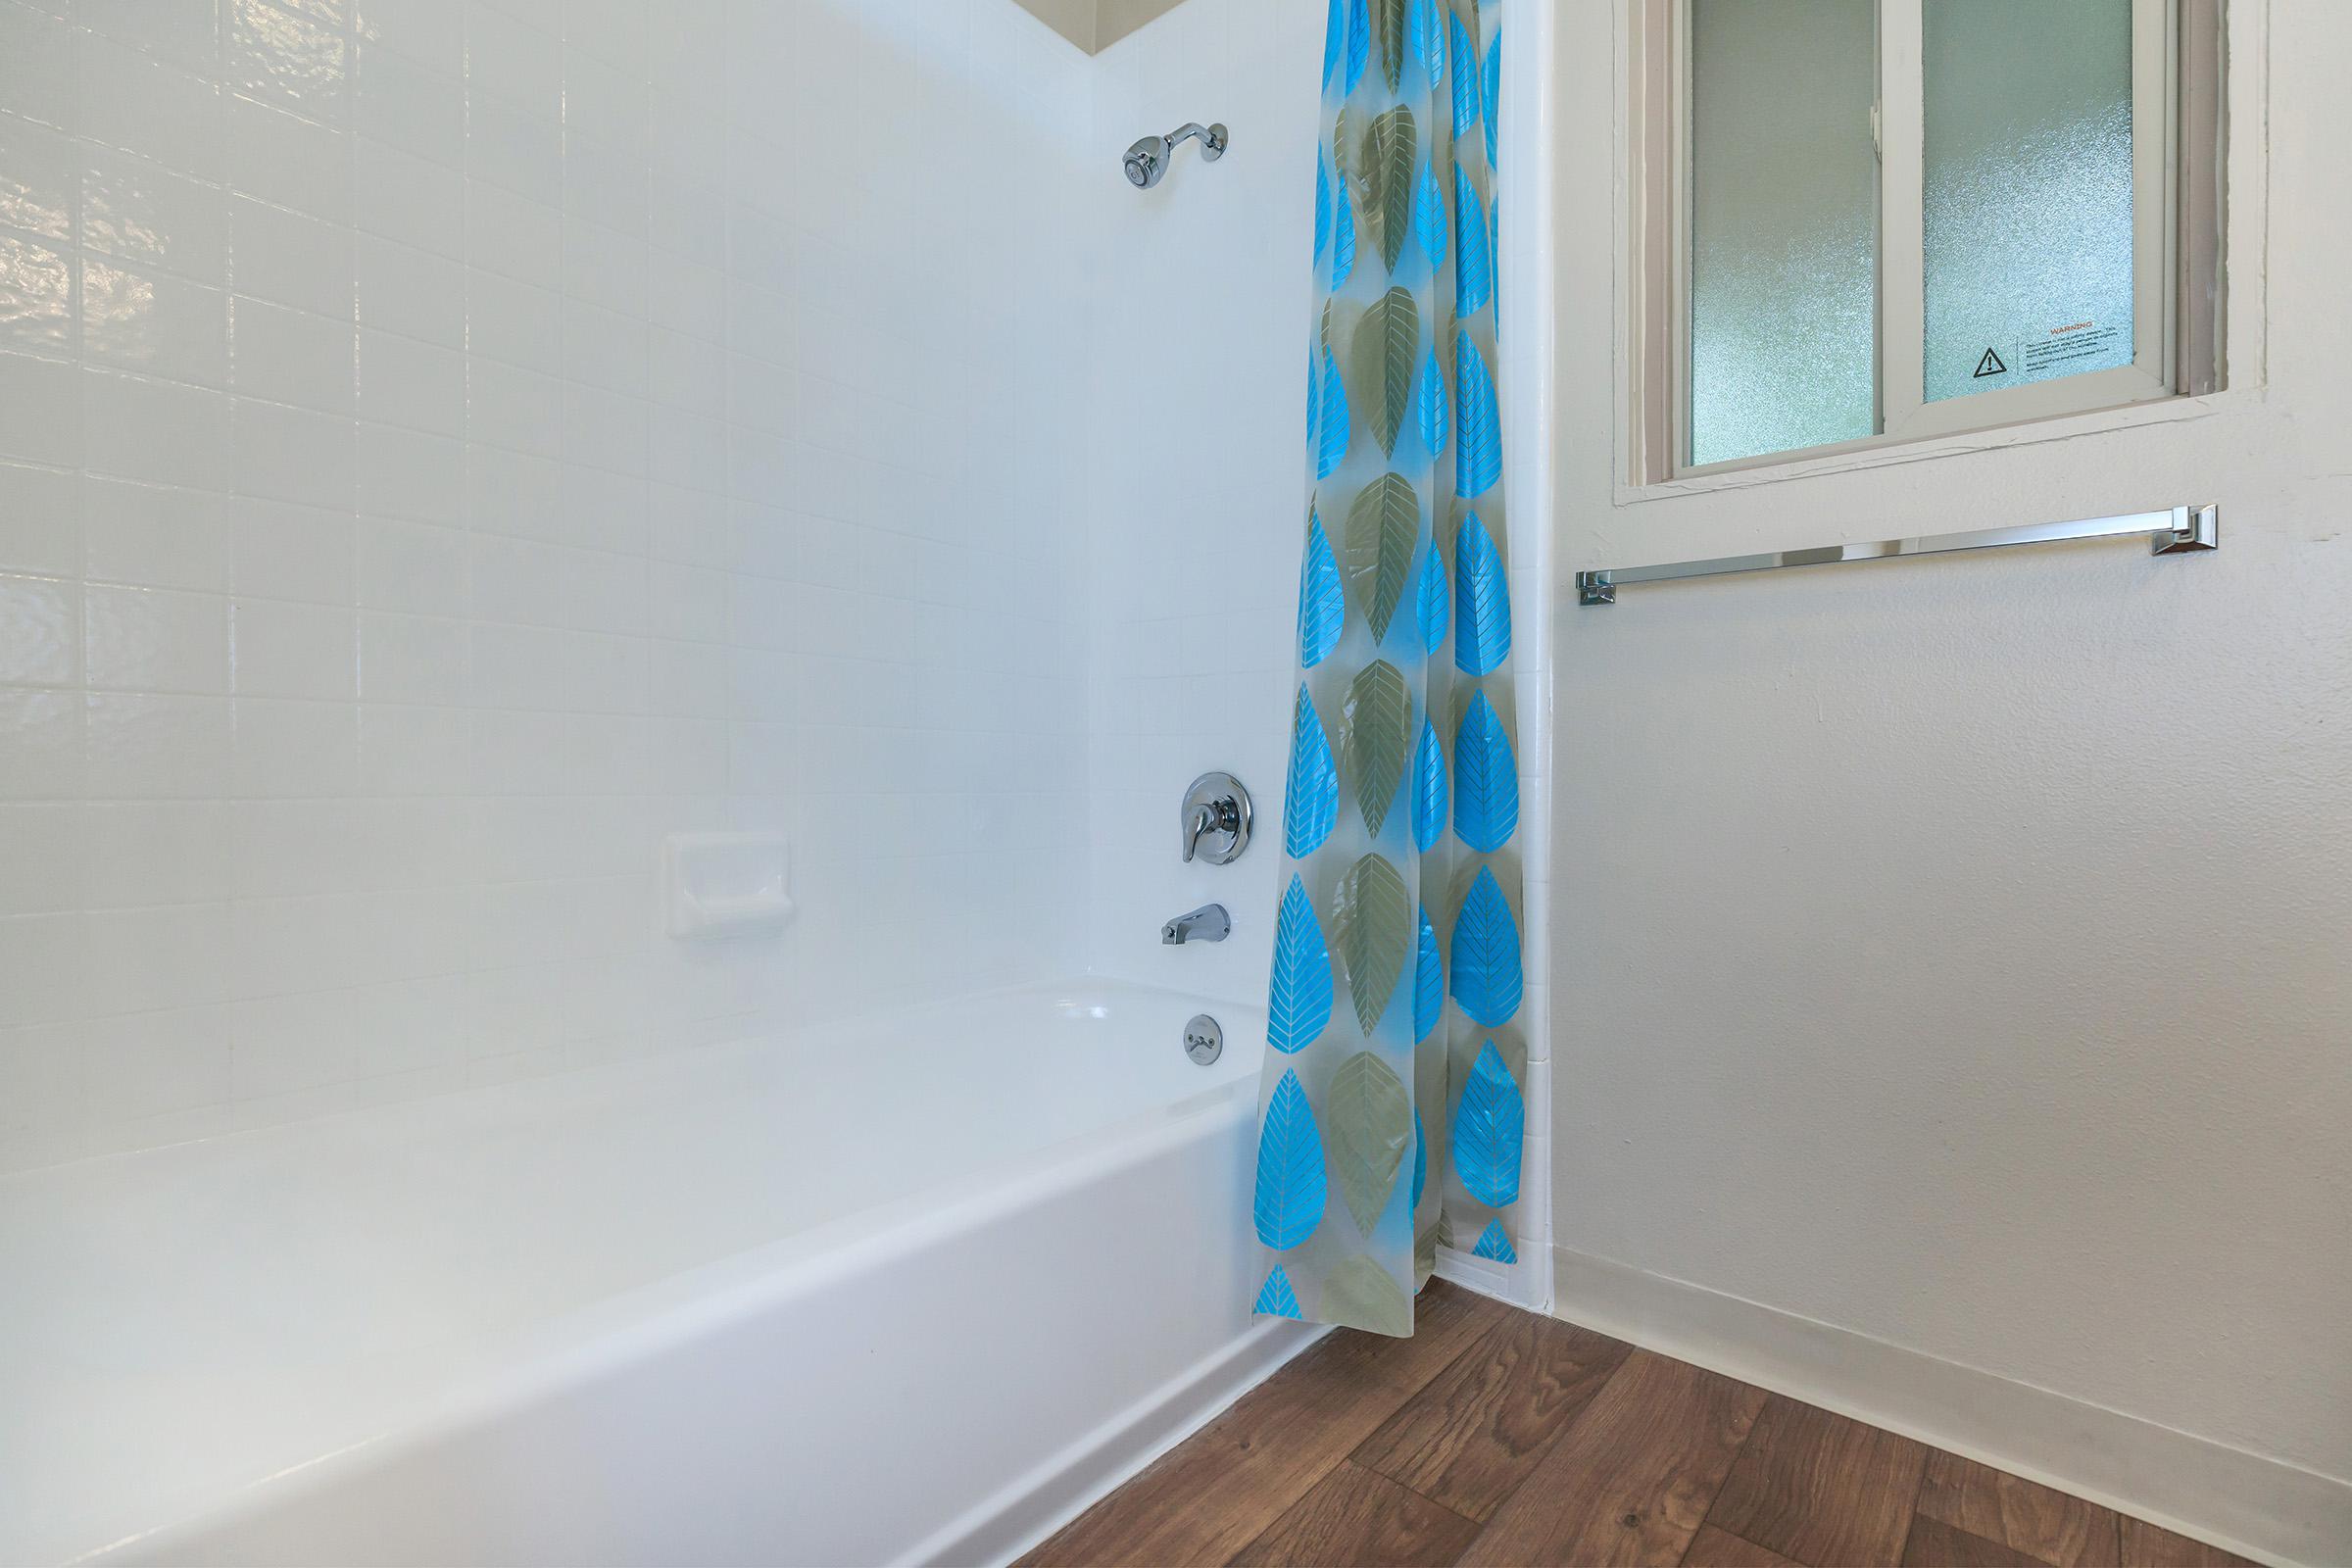 Bathroom with blue and green shower curtain